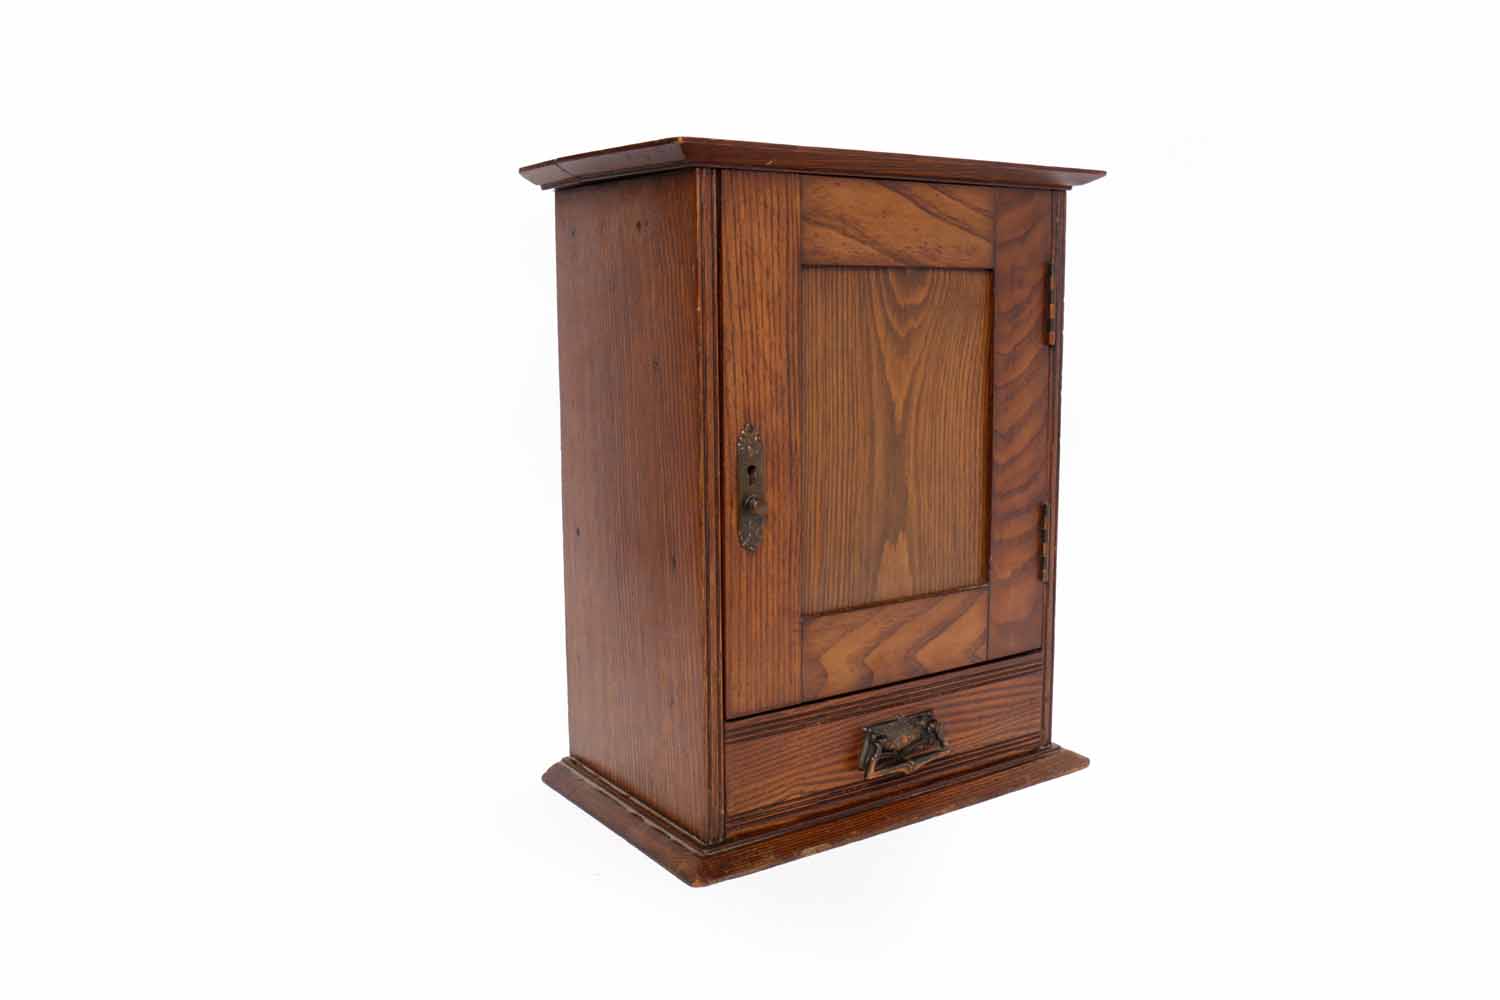 20TH CENTURY OAK TOBACCO CABINET the panelled hinged door and lid enclosing a shelf for tobacco jar